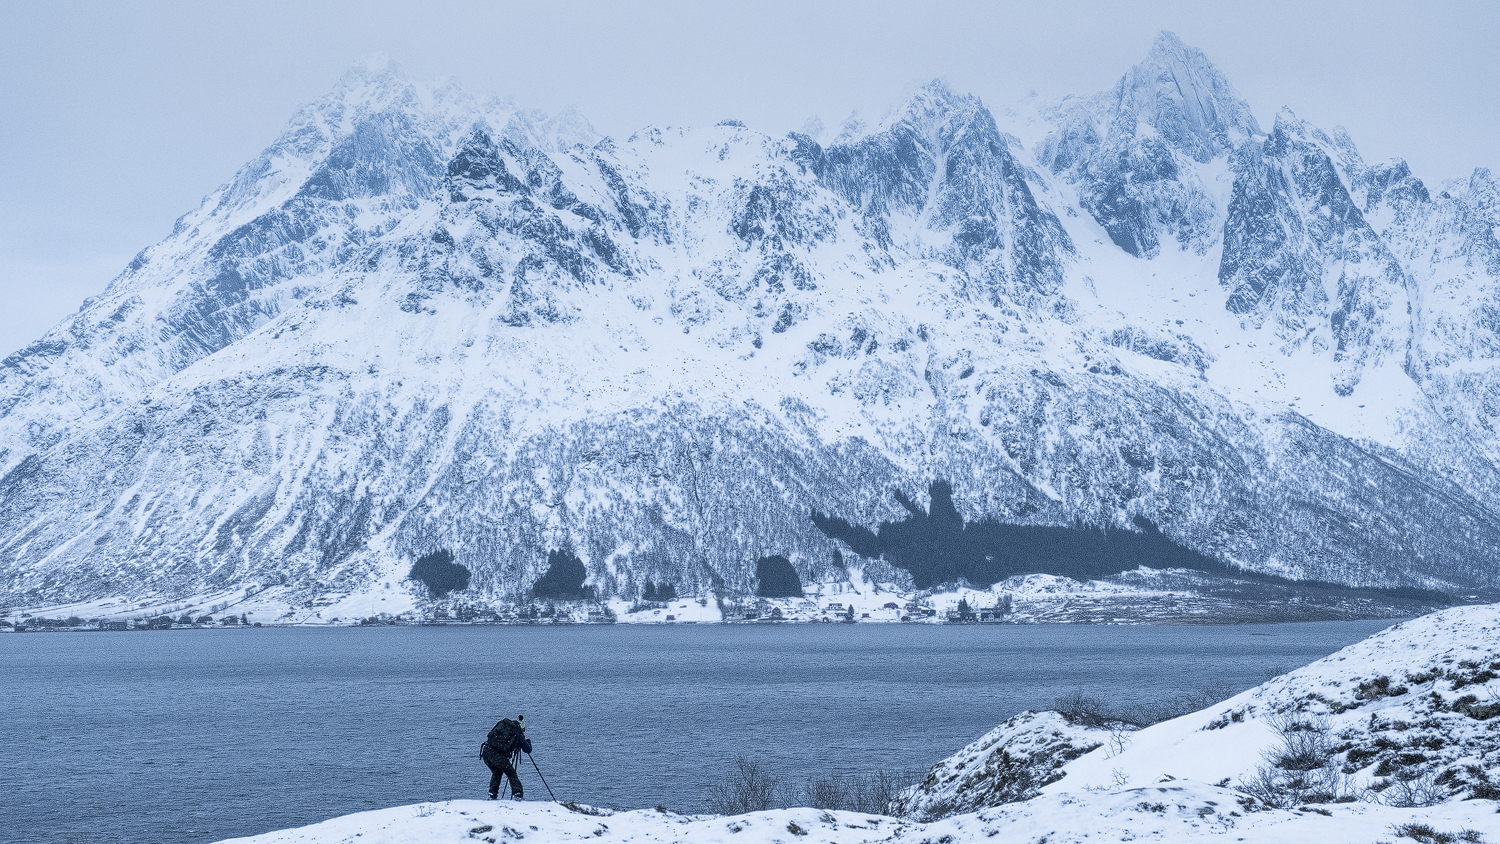 Surrounded by giants, Lofoten